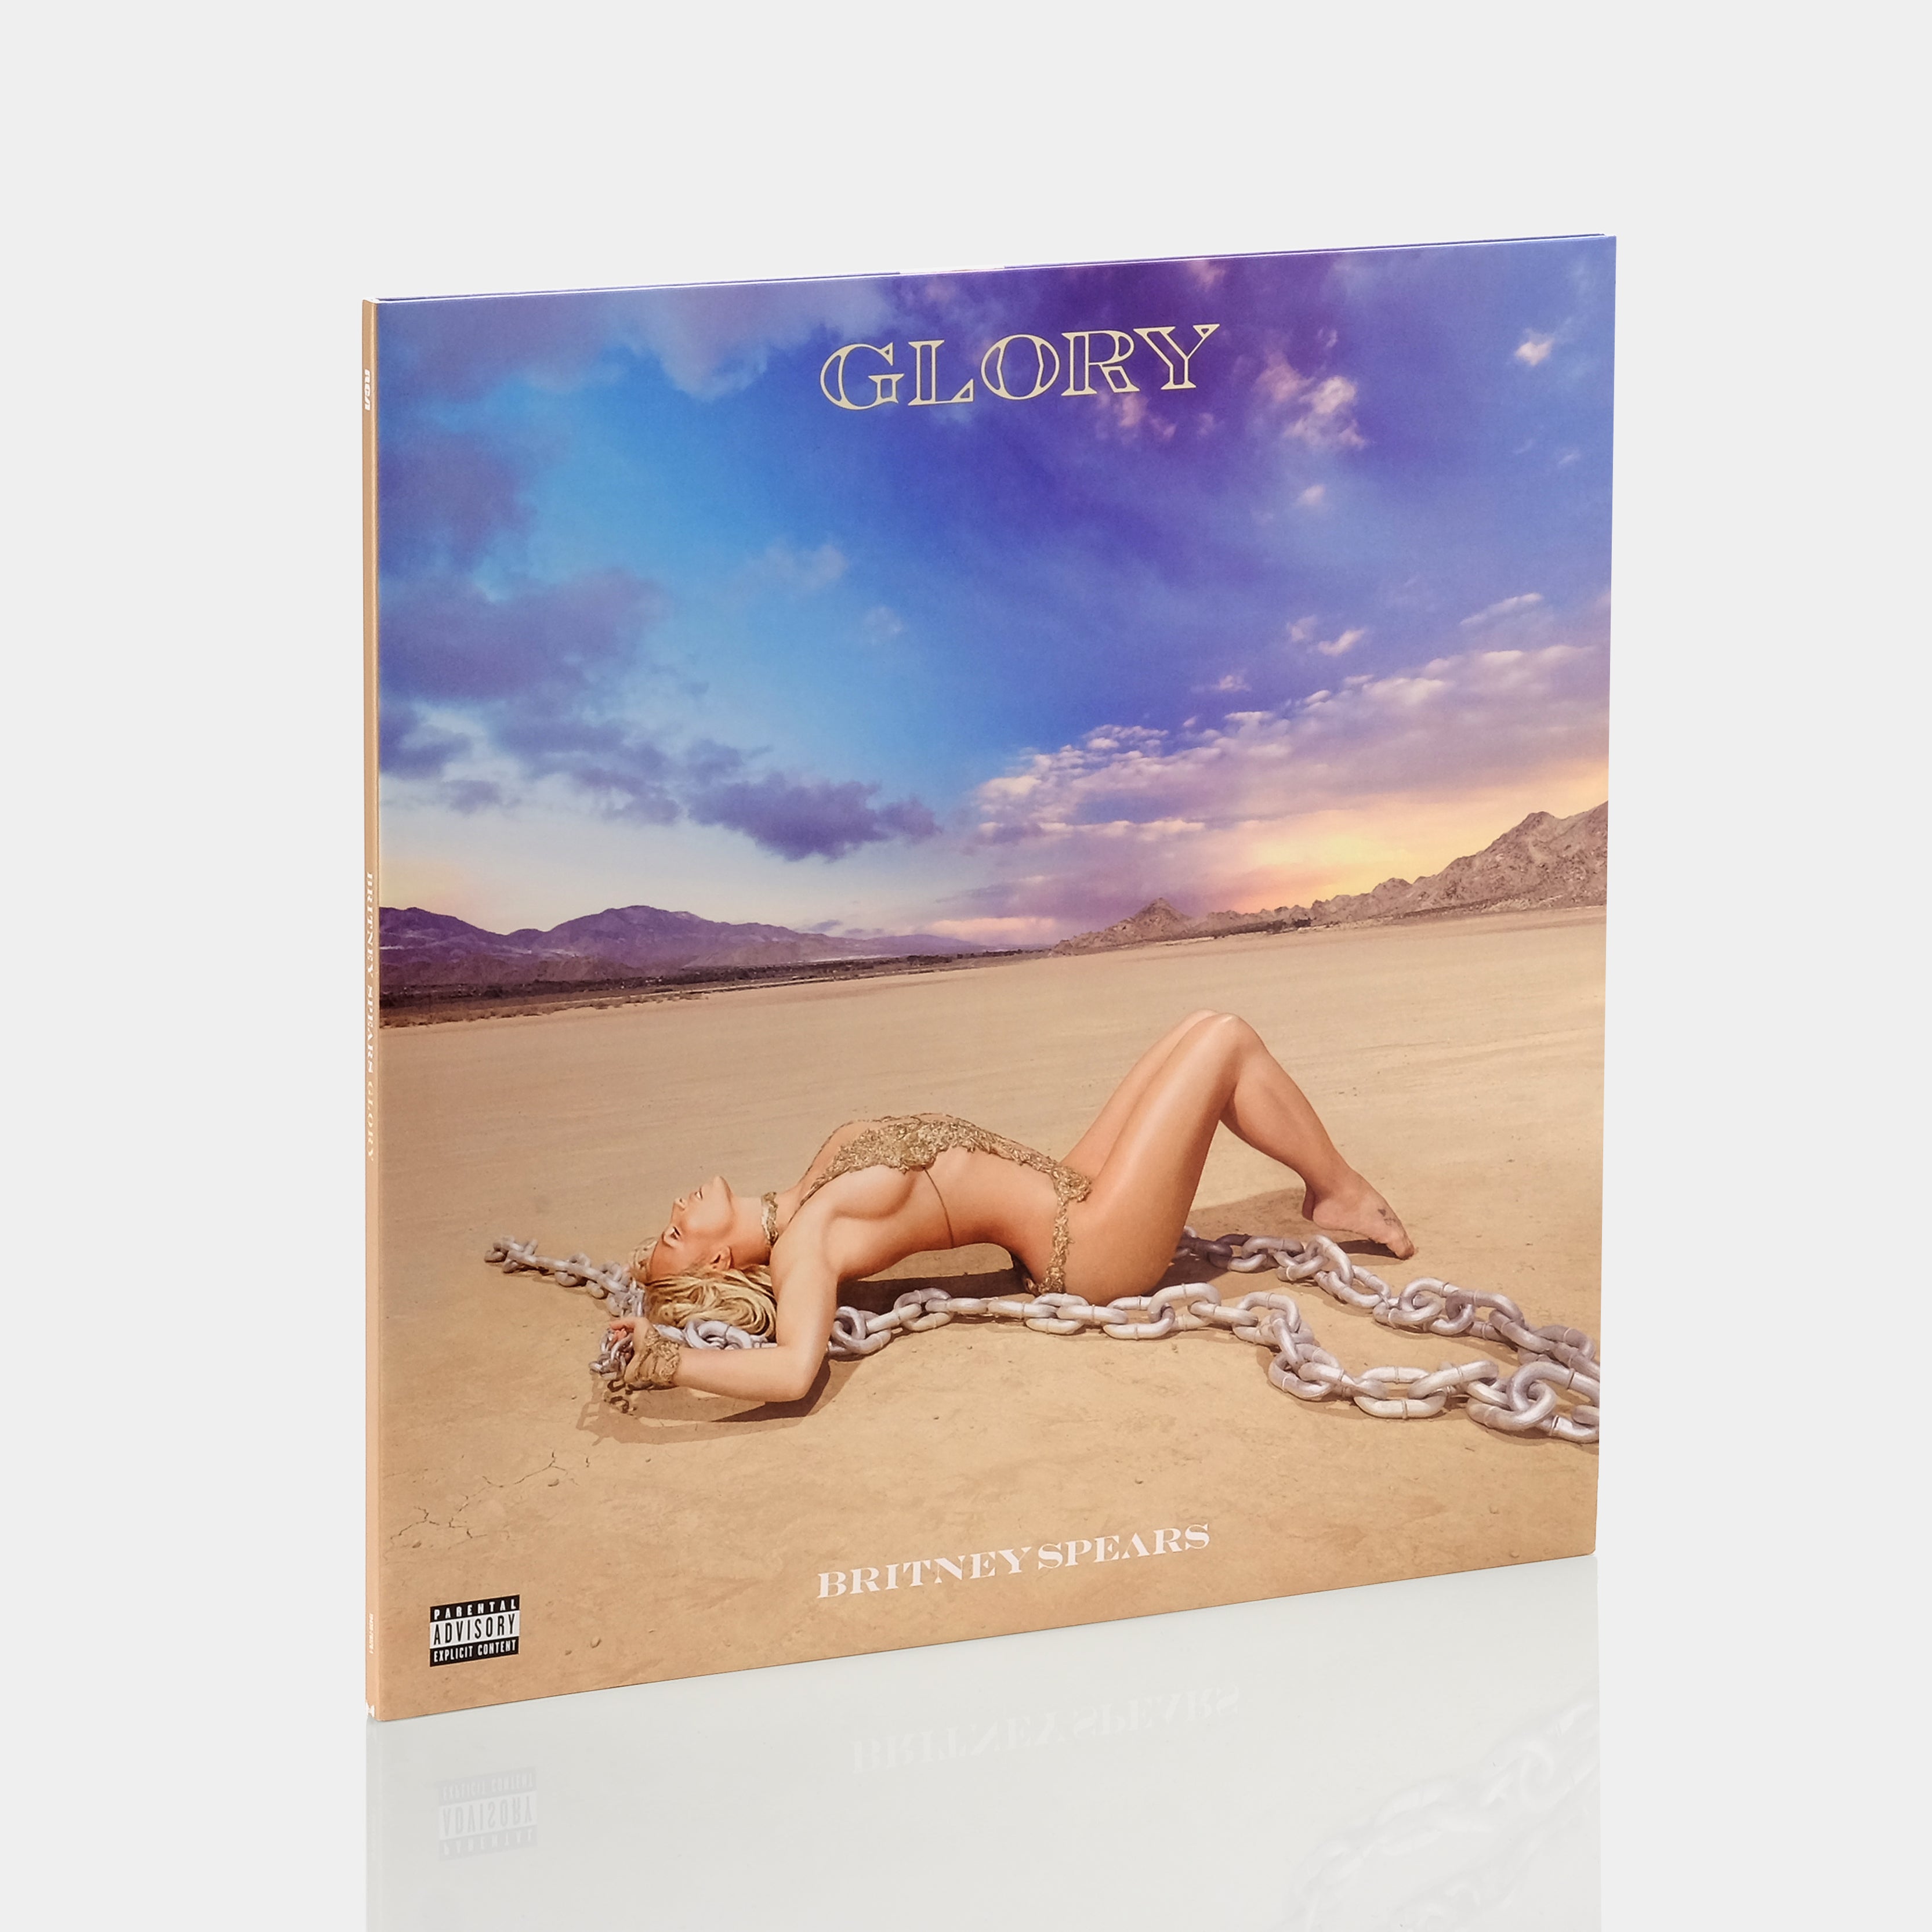 Britney Spears - Glory (Limited Edition Deluxe) 2xLP White Vinyl Record